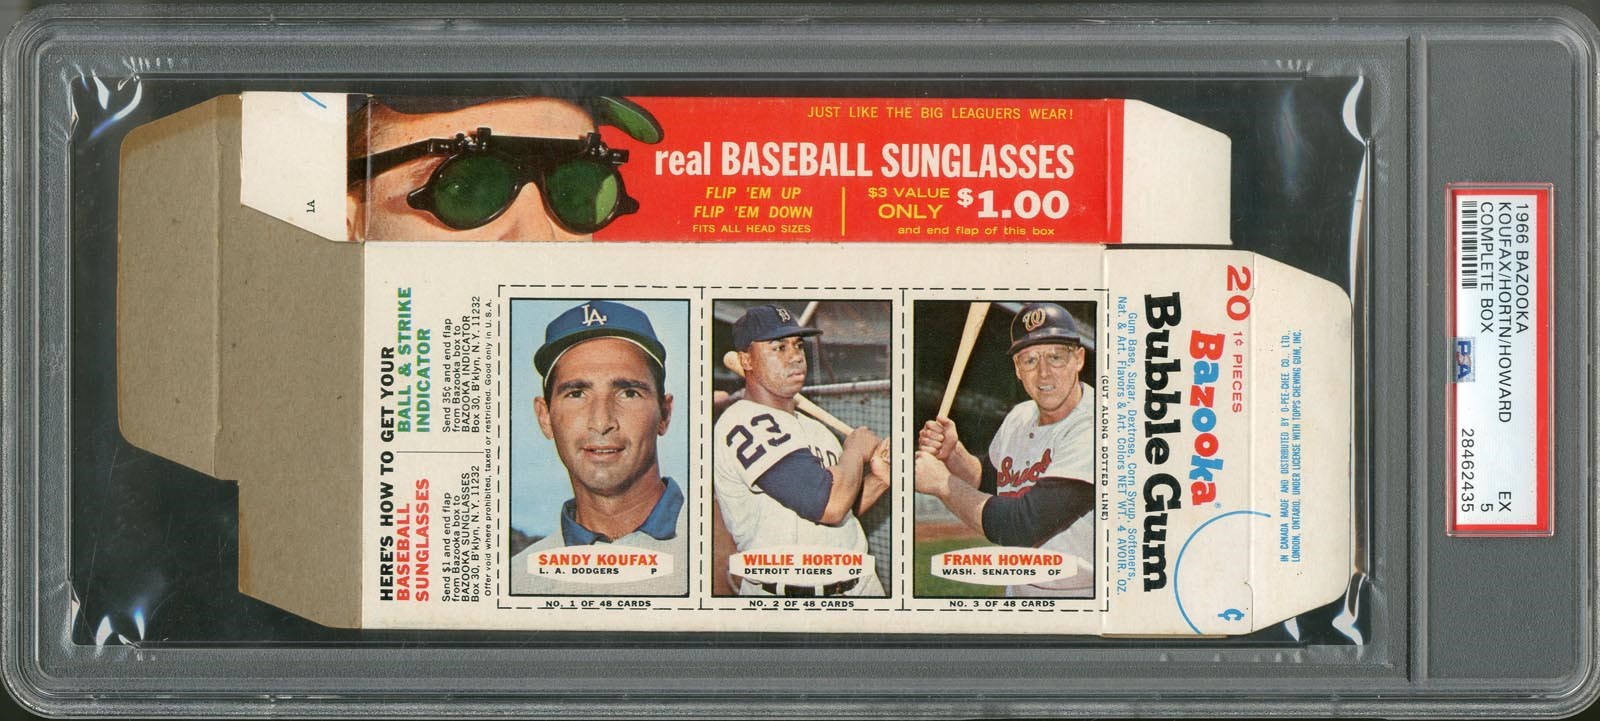 Baseball and Trading Cards - 1966 Bazooka Complete Box with Koufax, Horton and Howard PSA 5 EX